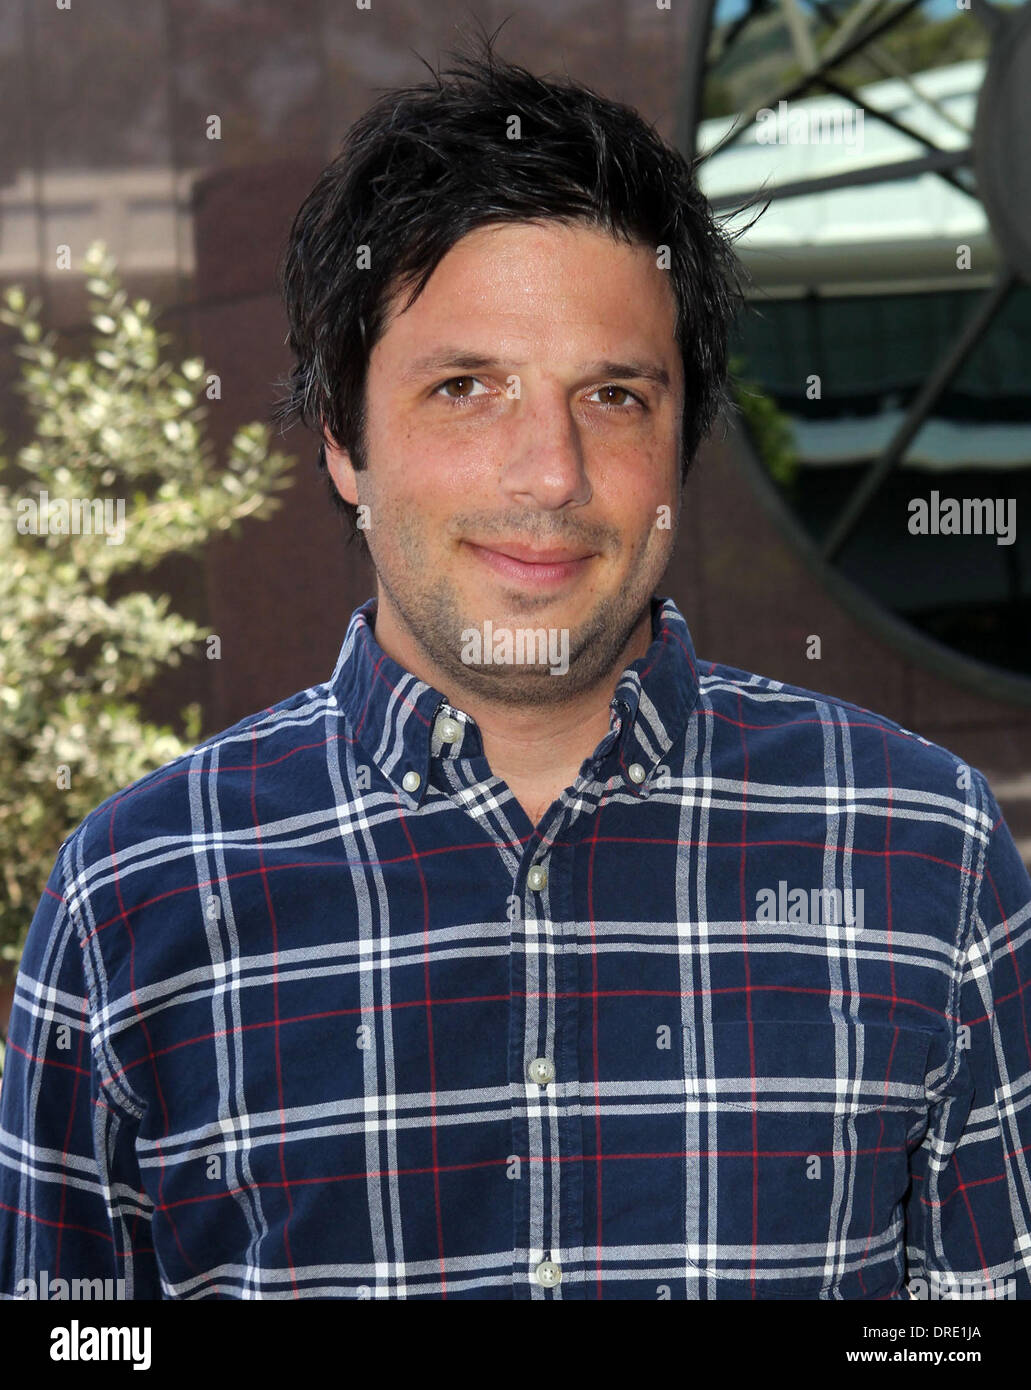 David Caspe 2012 OutFest Film Festival episode screening of 'Happy Endings' held at The Directors Guild of America Los Angeles, California - 21.07.12 Stock Photo